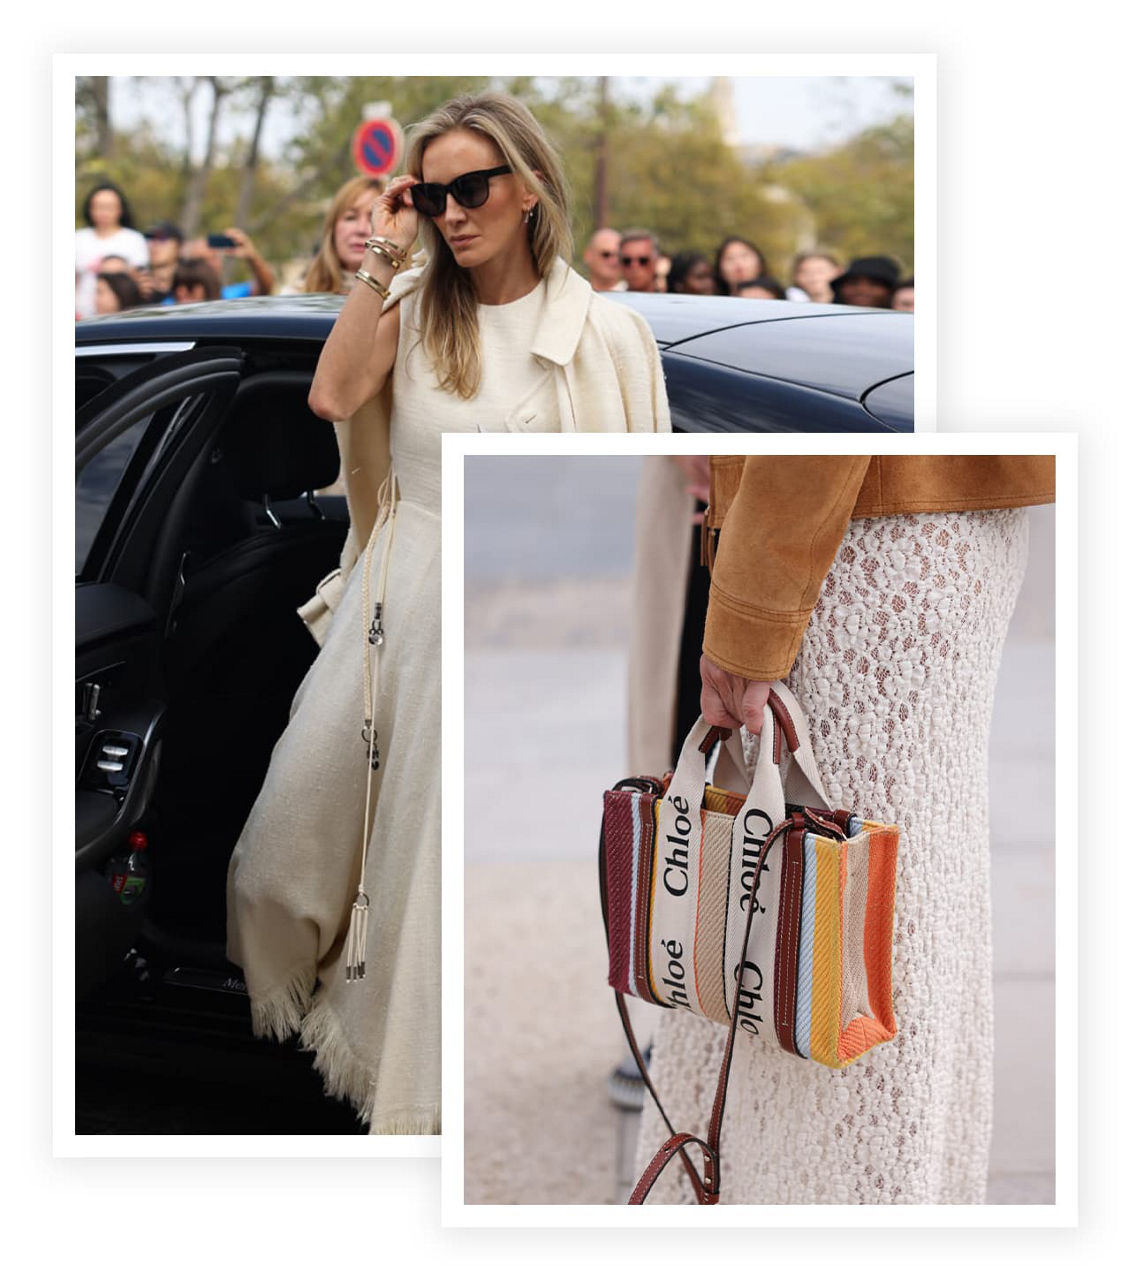 New Dior, Versace and Longchamp Bags Are This Week's Celeb Faves